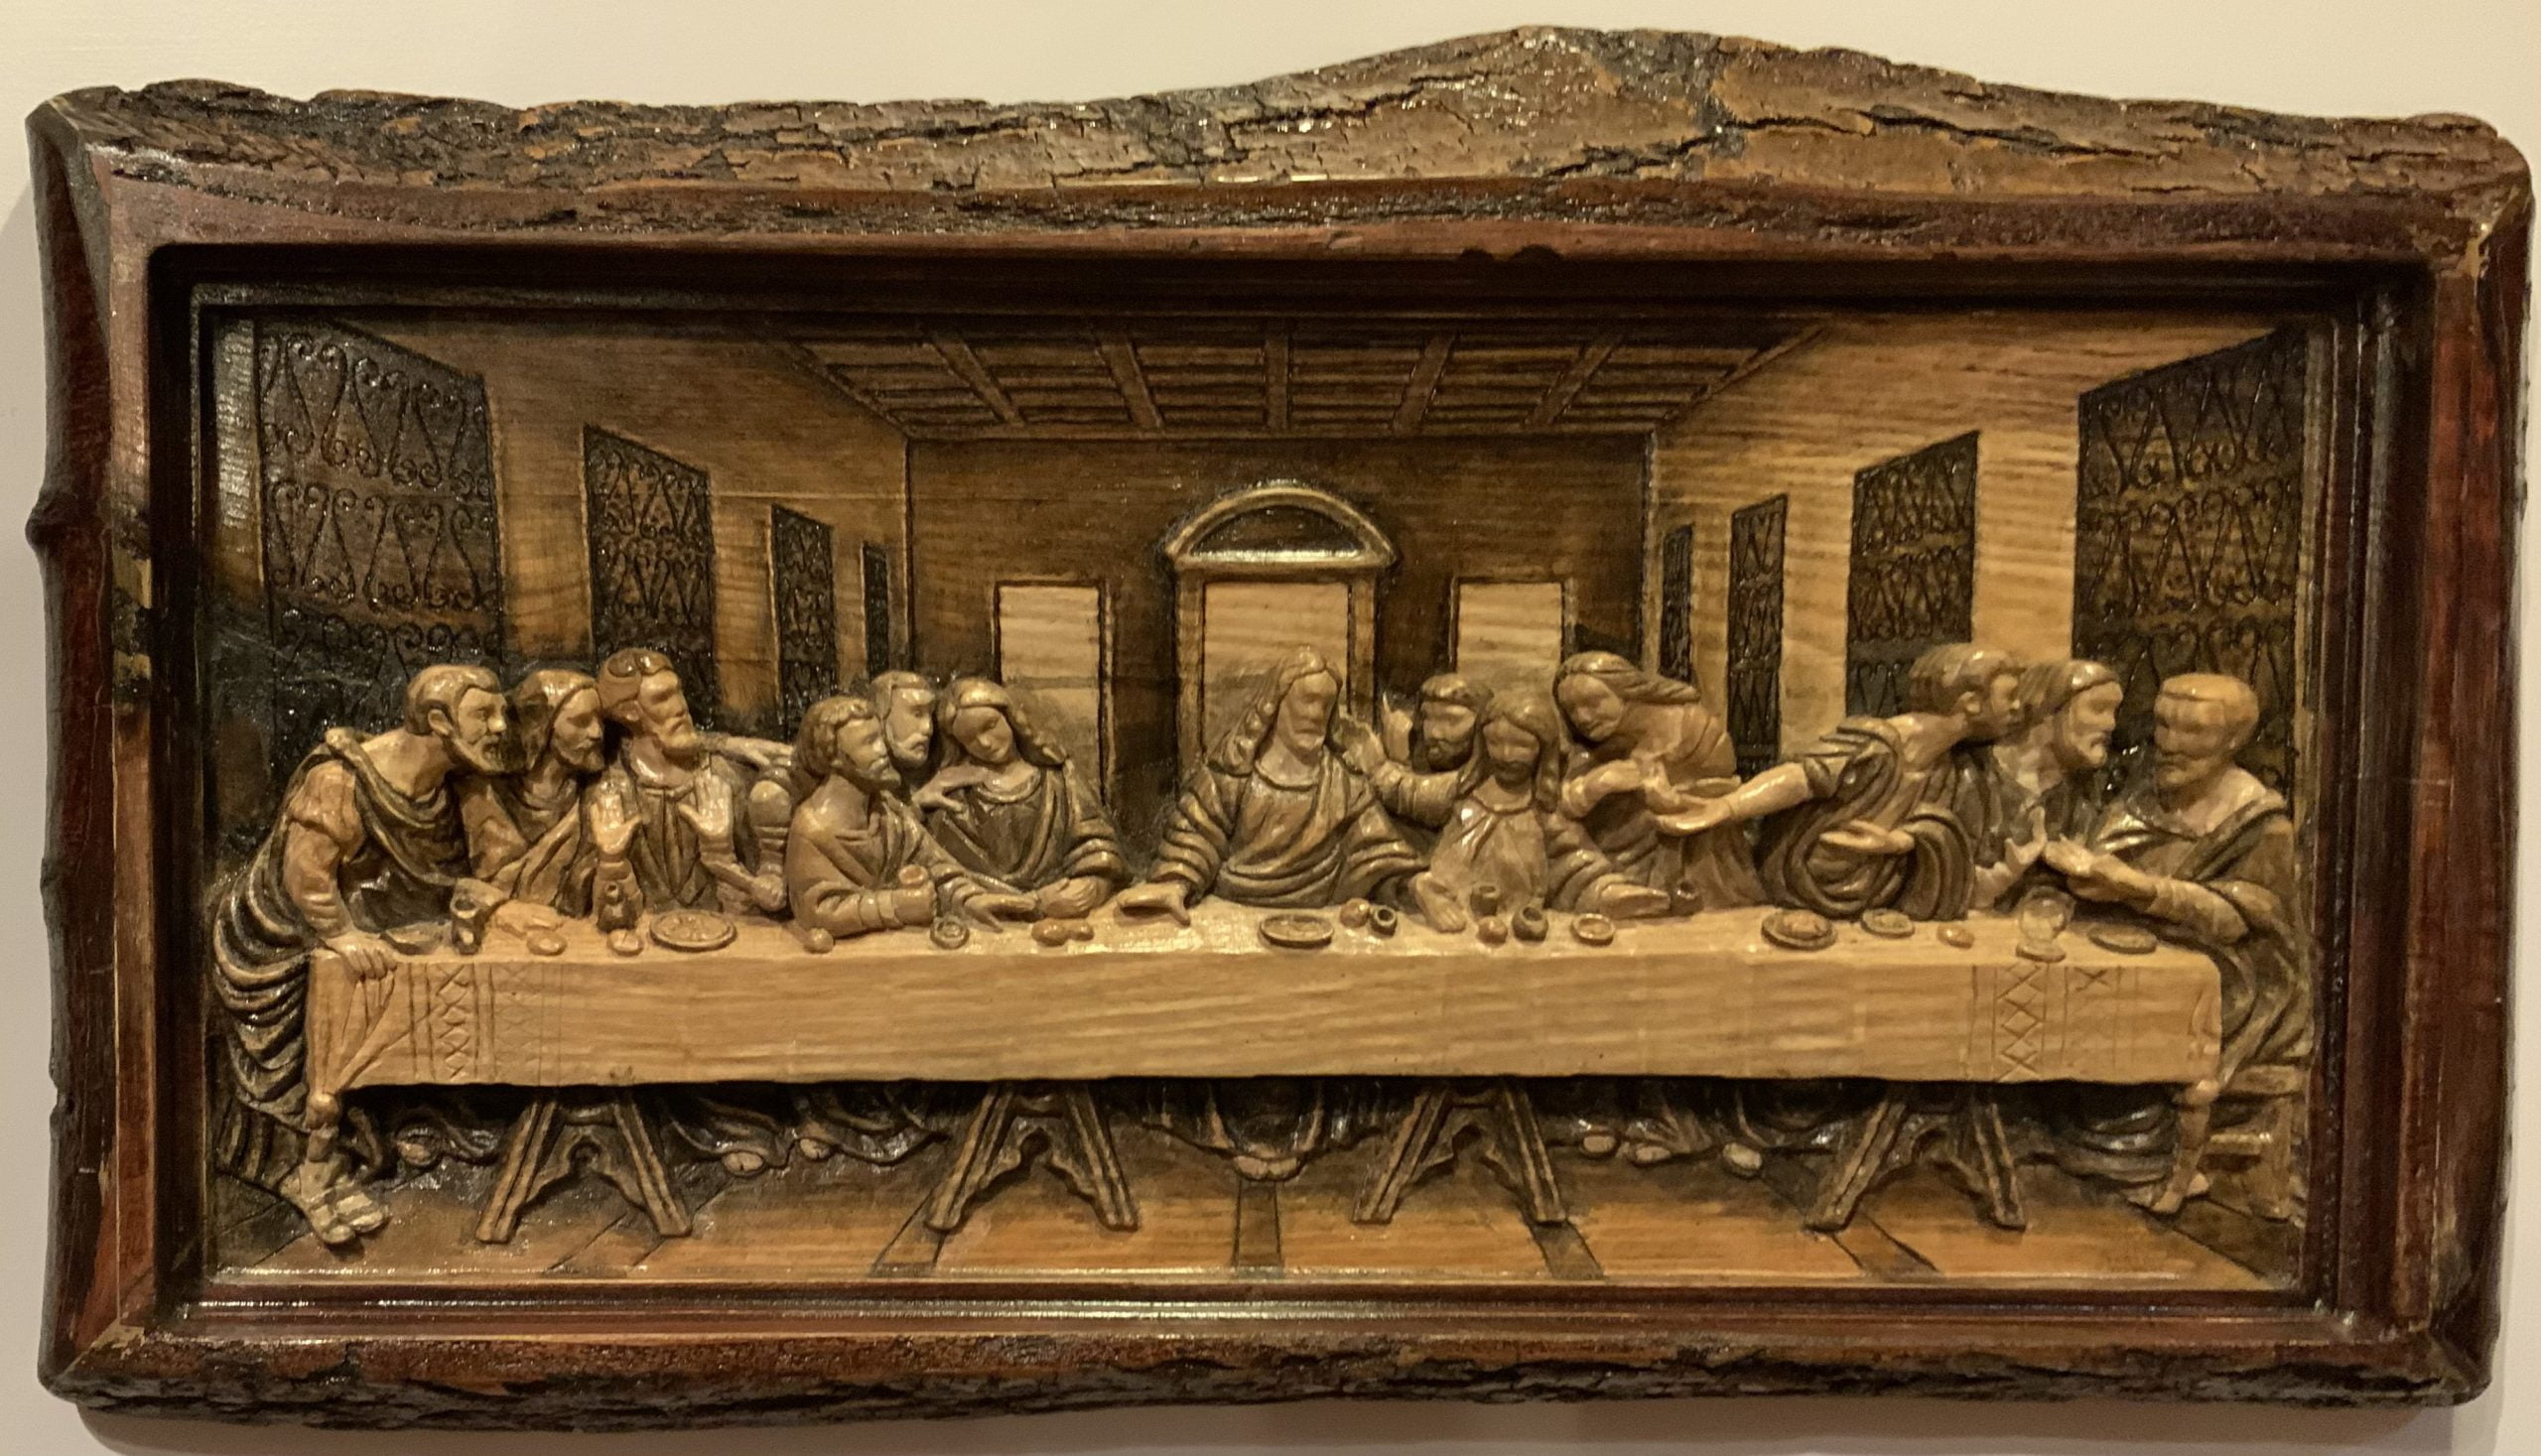 Preorders for "The Last Supper". Wood carving. Mykola Babiy.